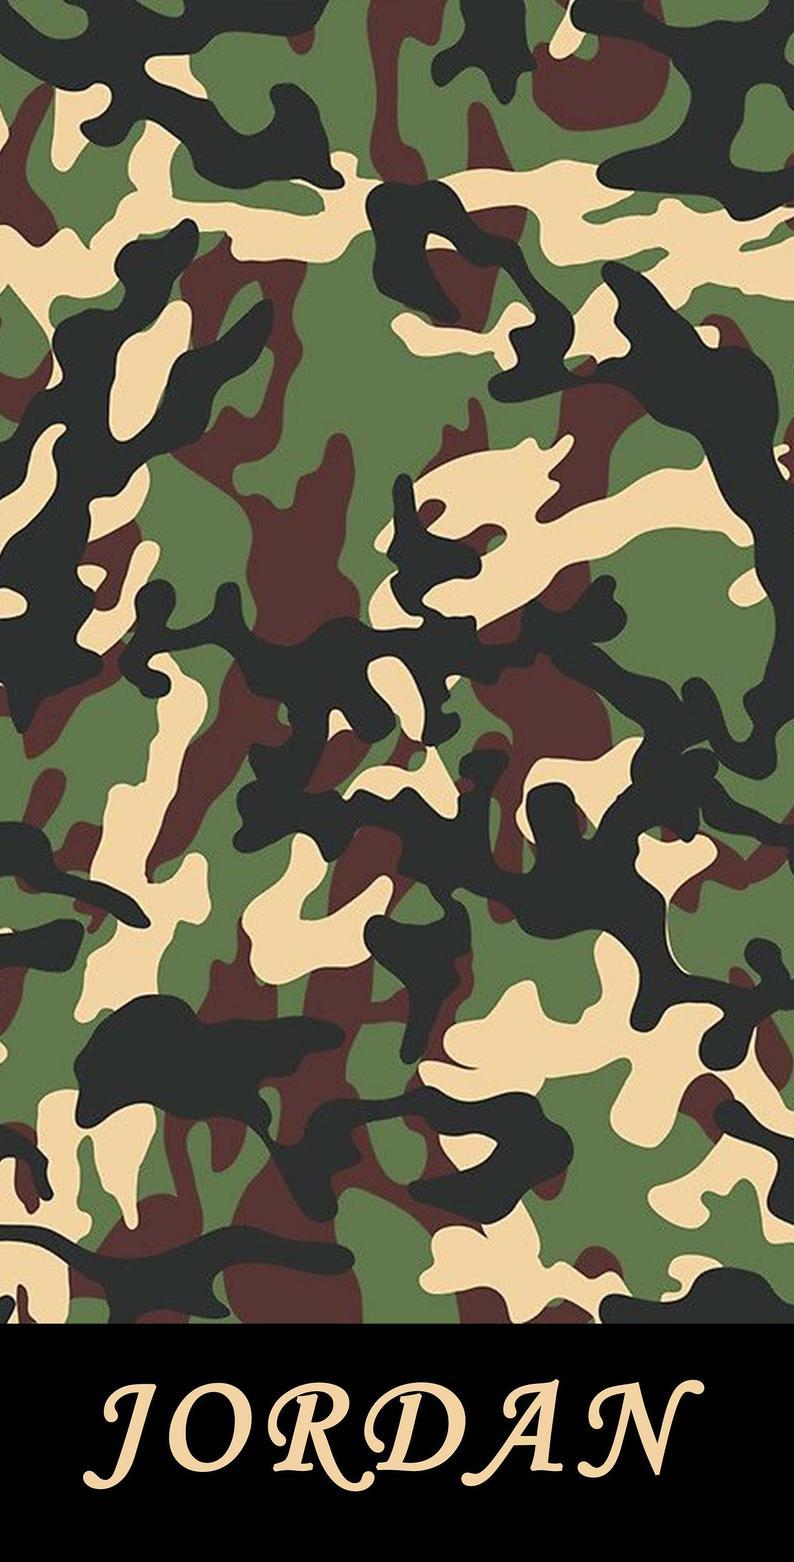 Personalized Camouflage Beach Towels